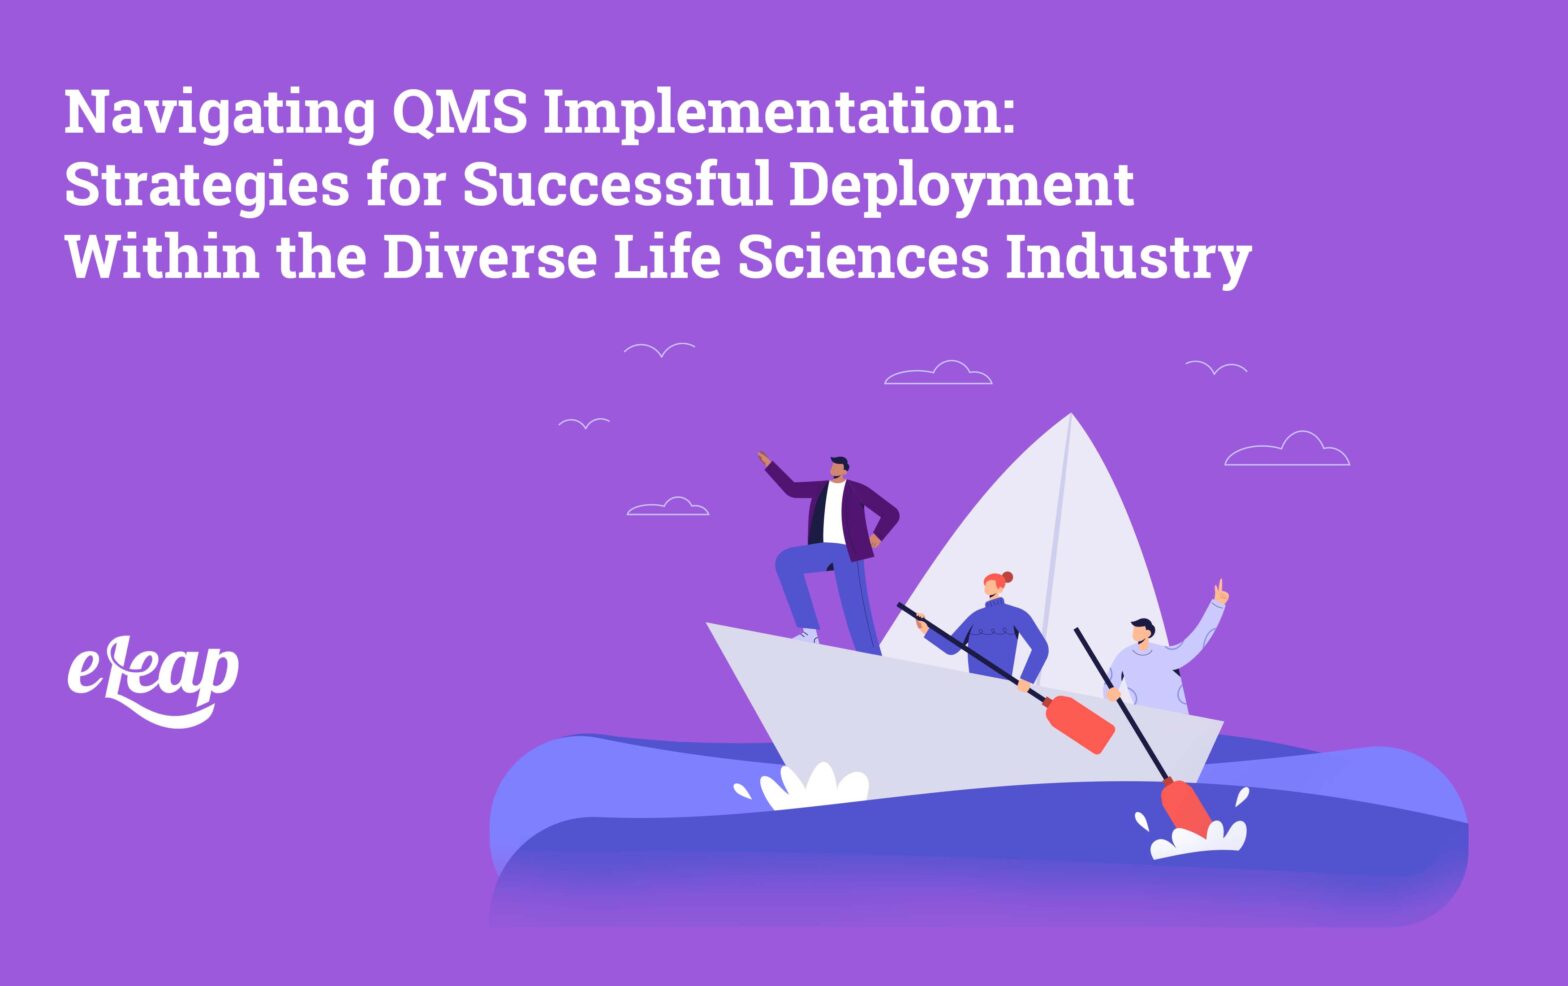 Navigating QMS Implementation: Strategies for Successful Deployment Within the Diverse Life Sciences Industry